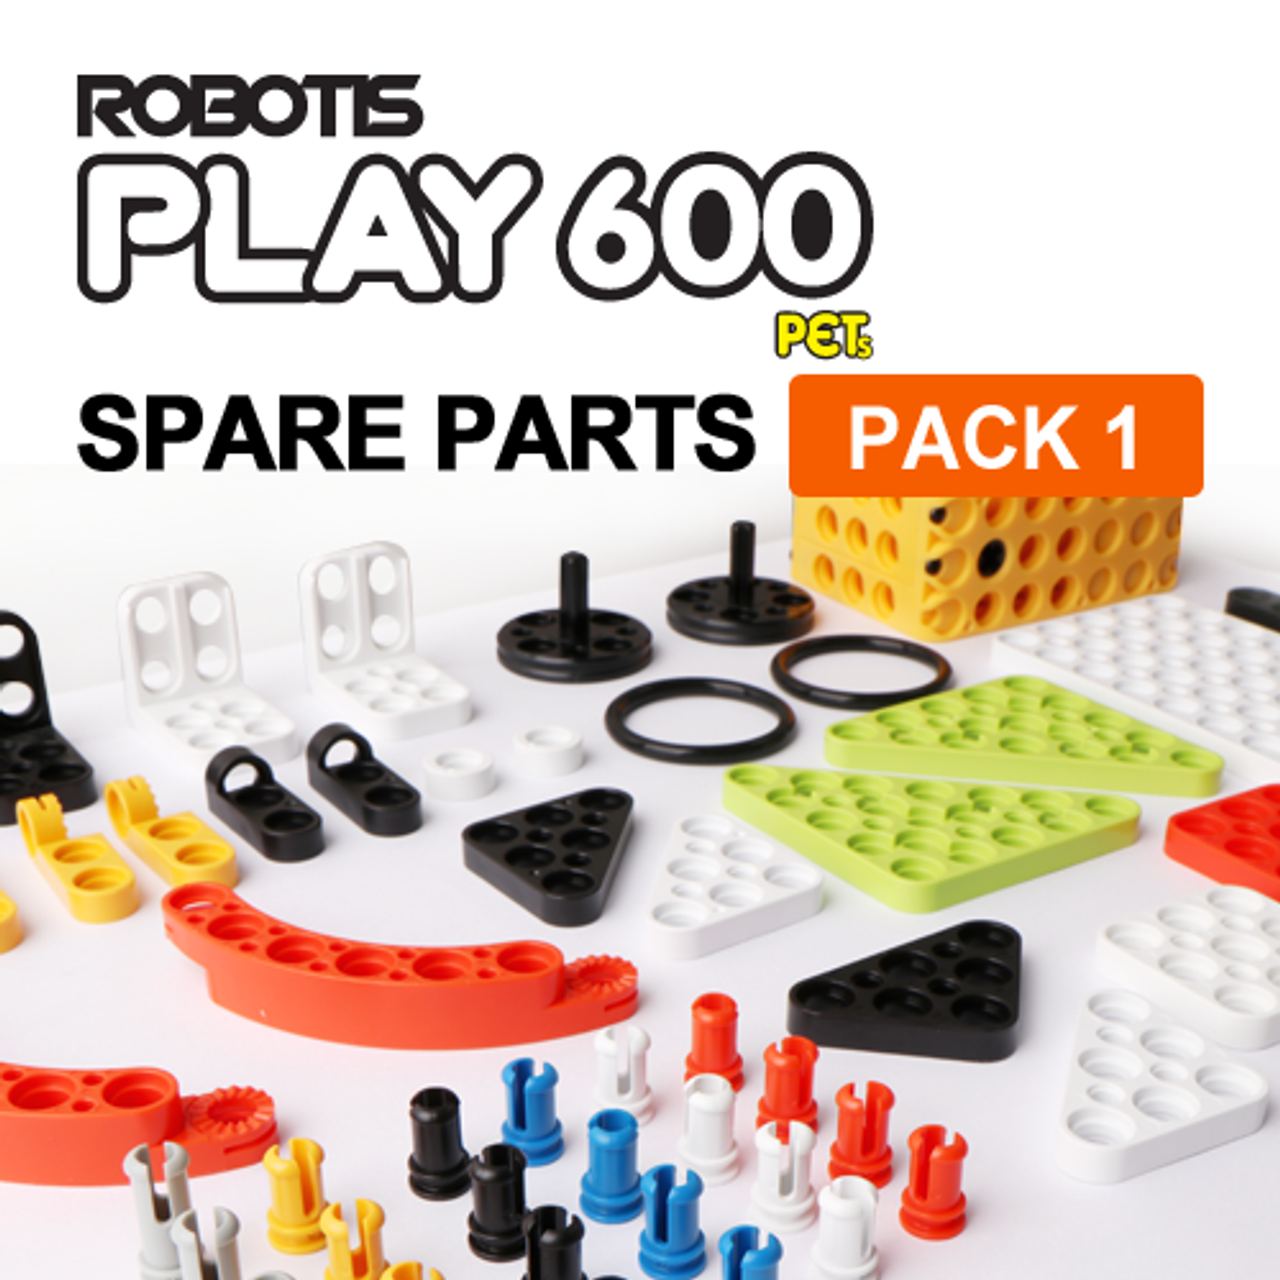 PLAY 600_Spare Parts Packs